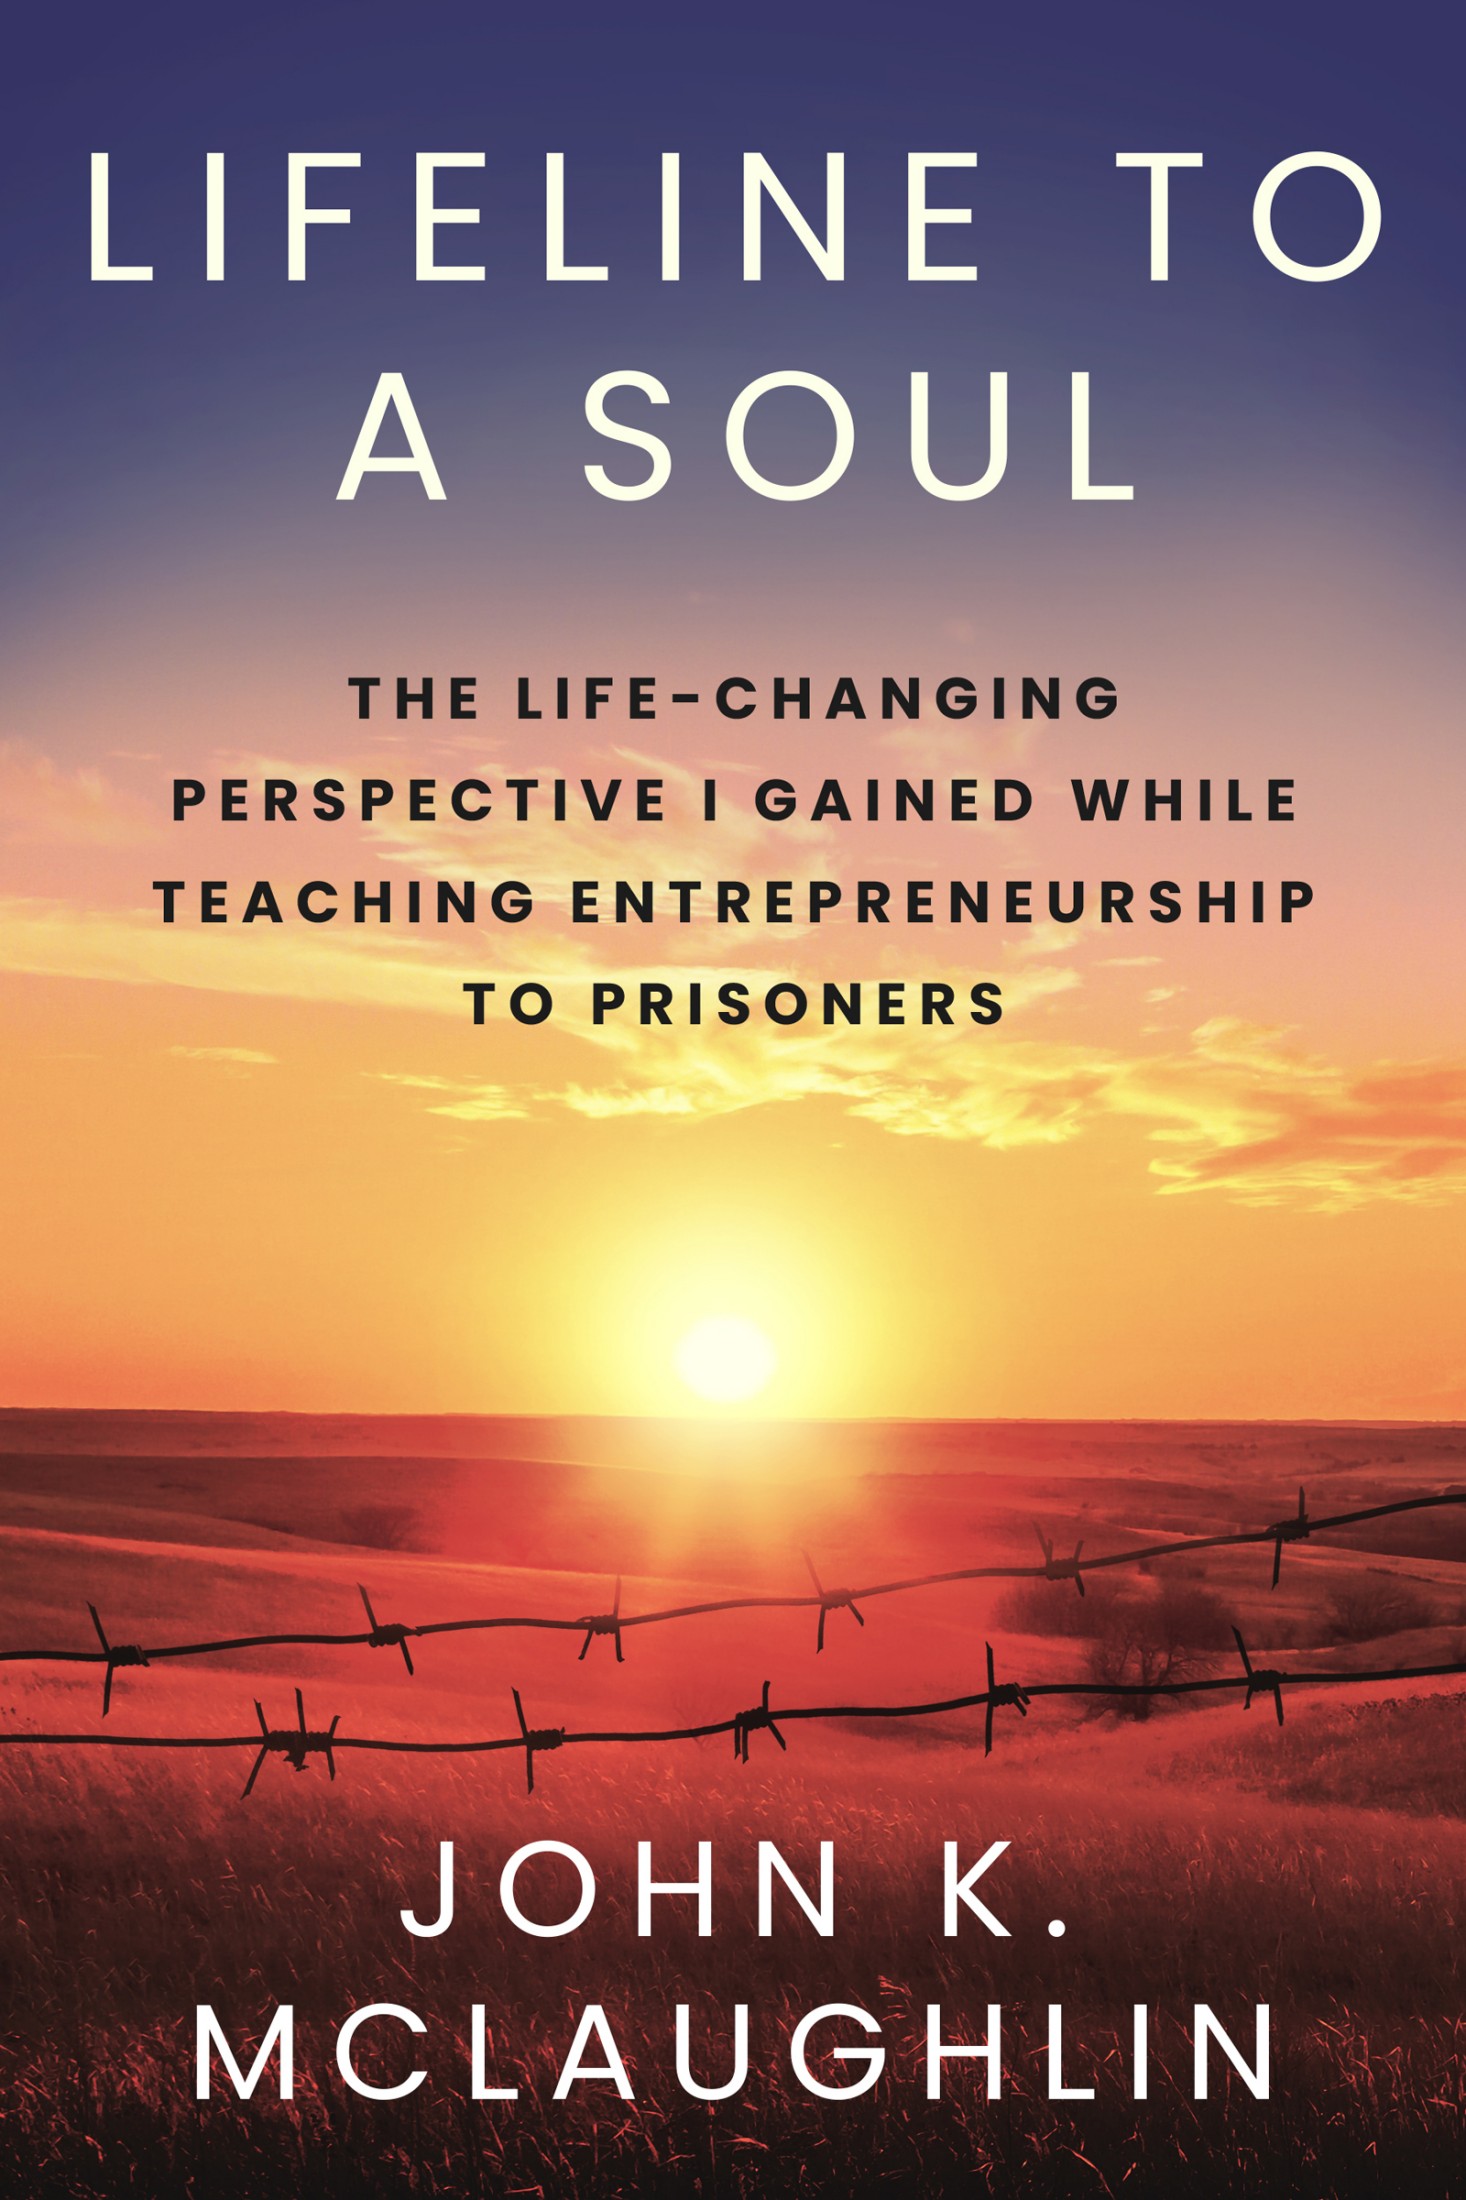 Book Review: “Lifeline to a Soul” — A Memoir on Prison Education and Reform